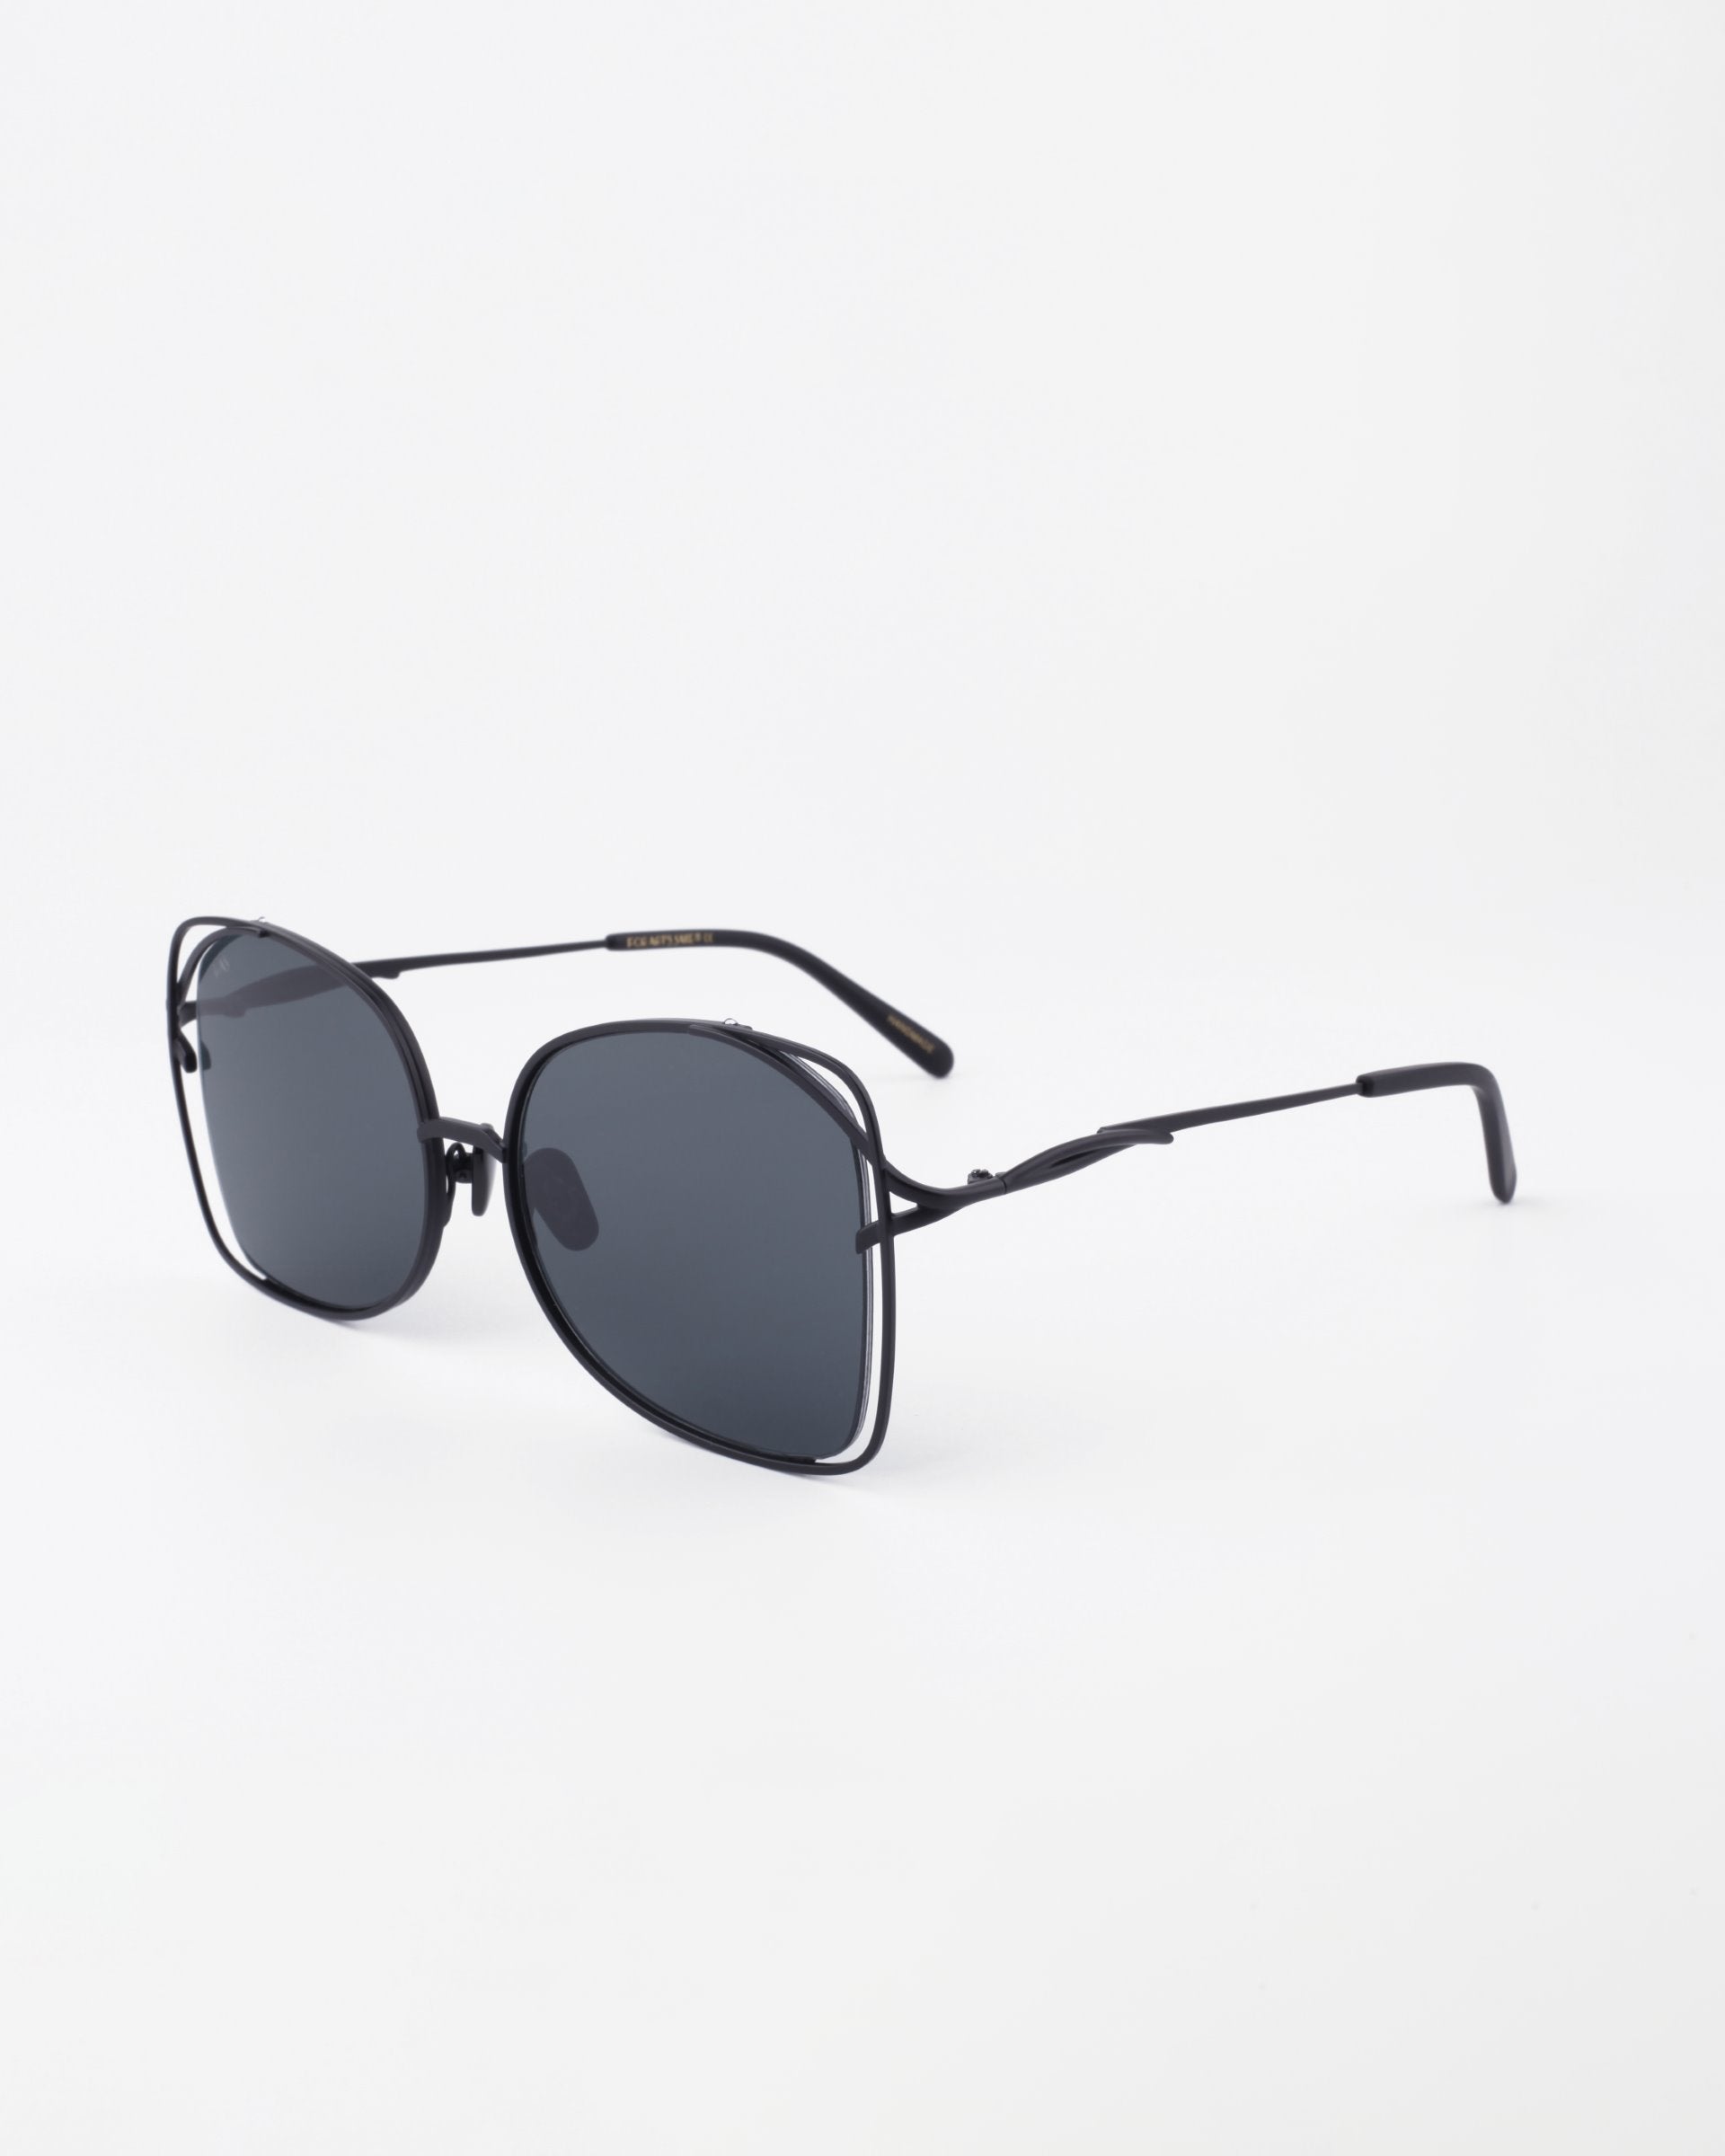 A pair of sleek, oversized handmade Carousel sunglasses by For Art&#39;s Sake® with dark lenses and a thin black metal frame. The sunglasses are angled slightly to the right and placed on a plain white background, offering both UVA &amp; UVB protection.